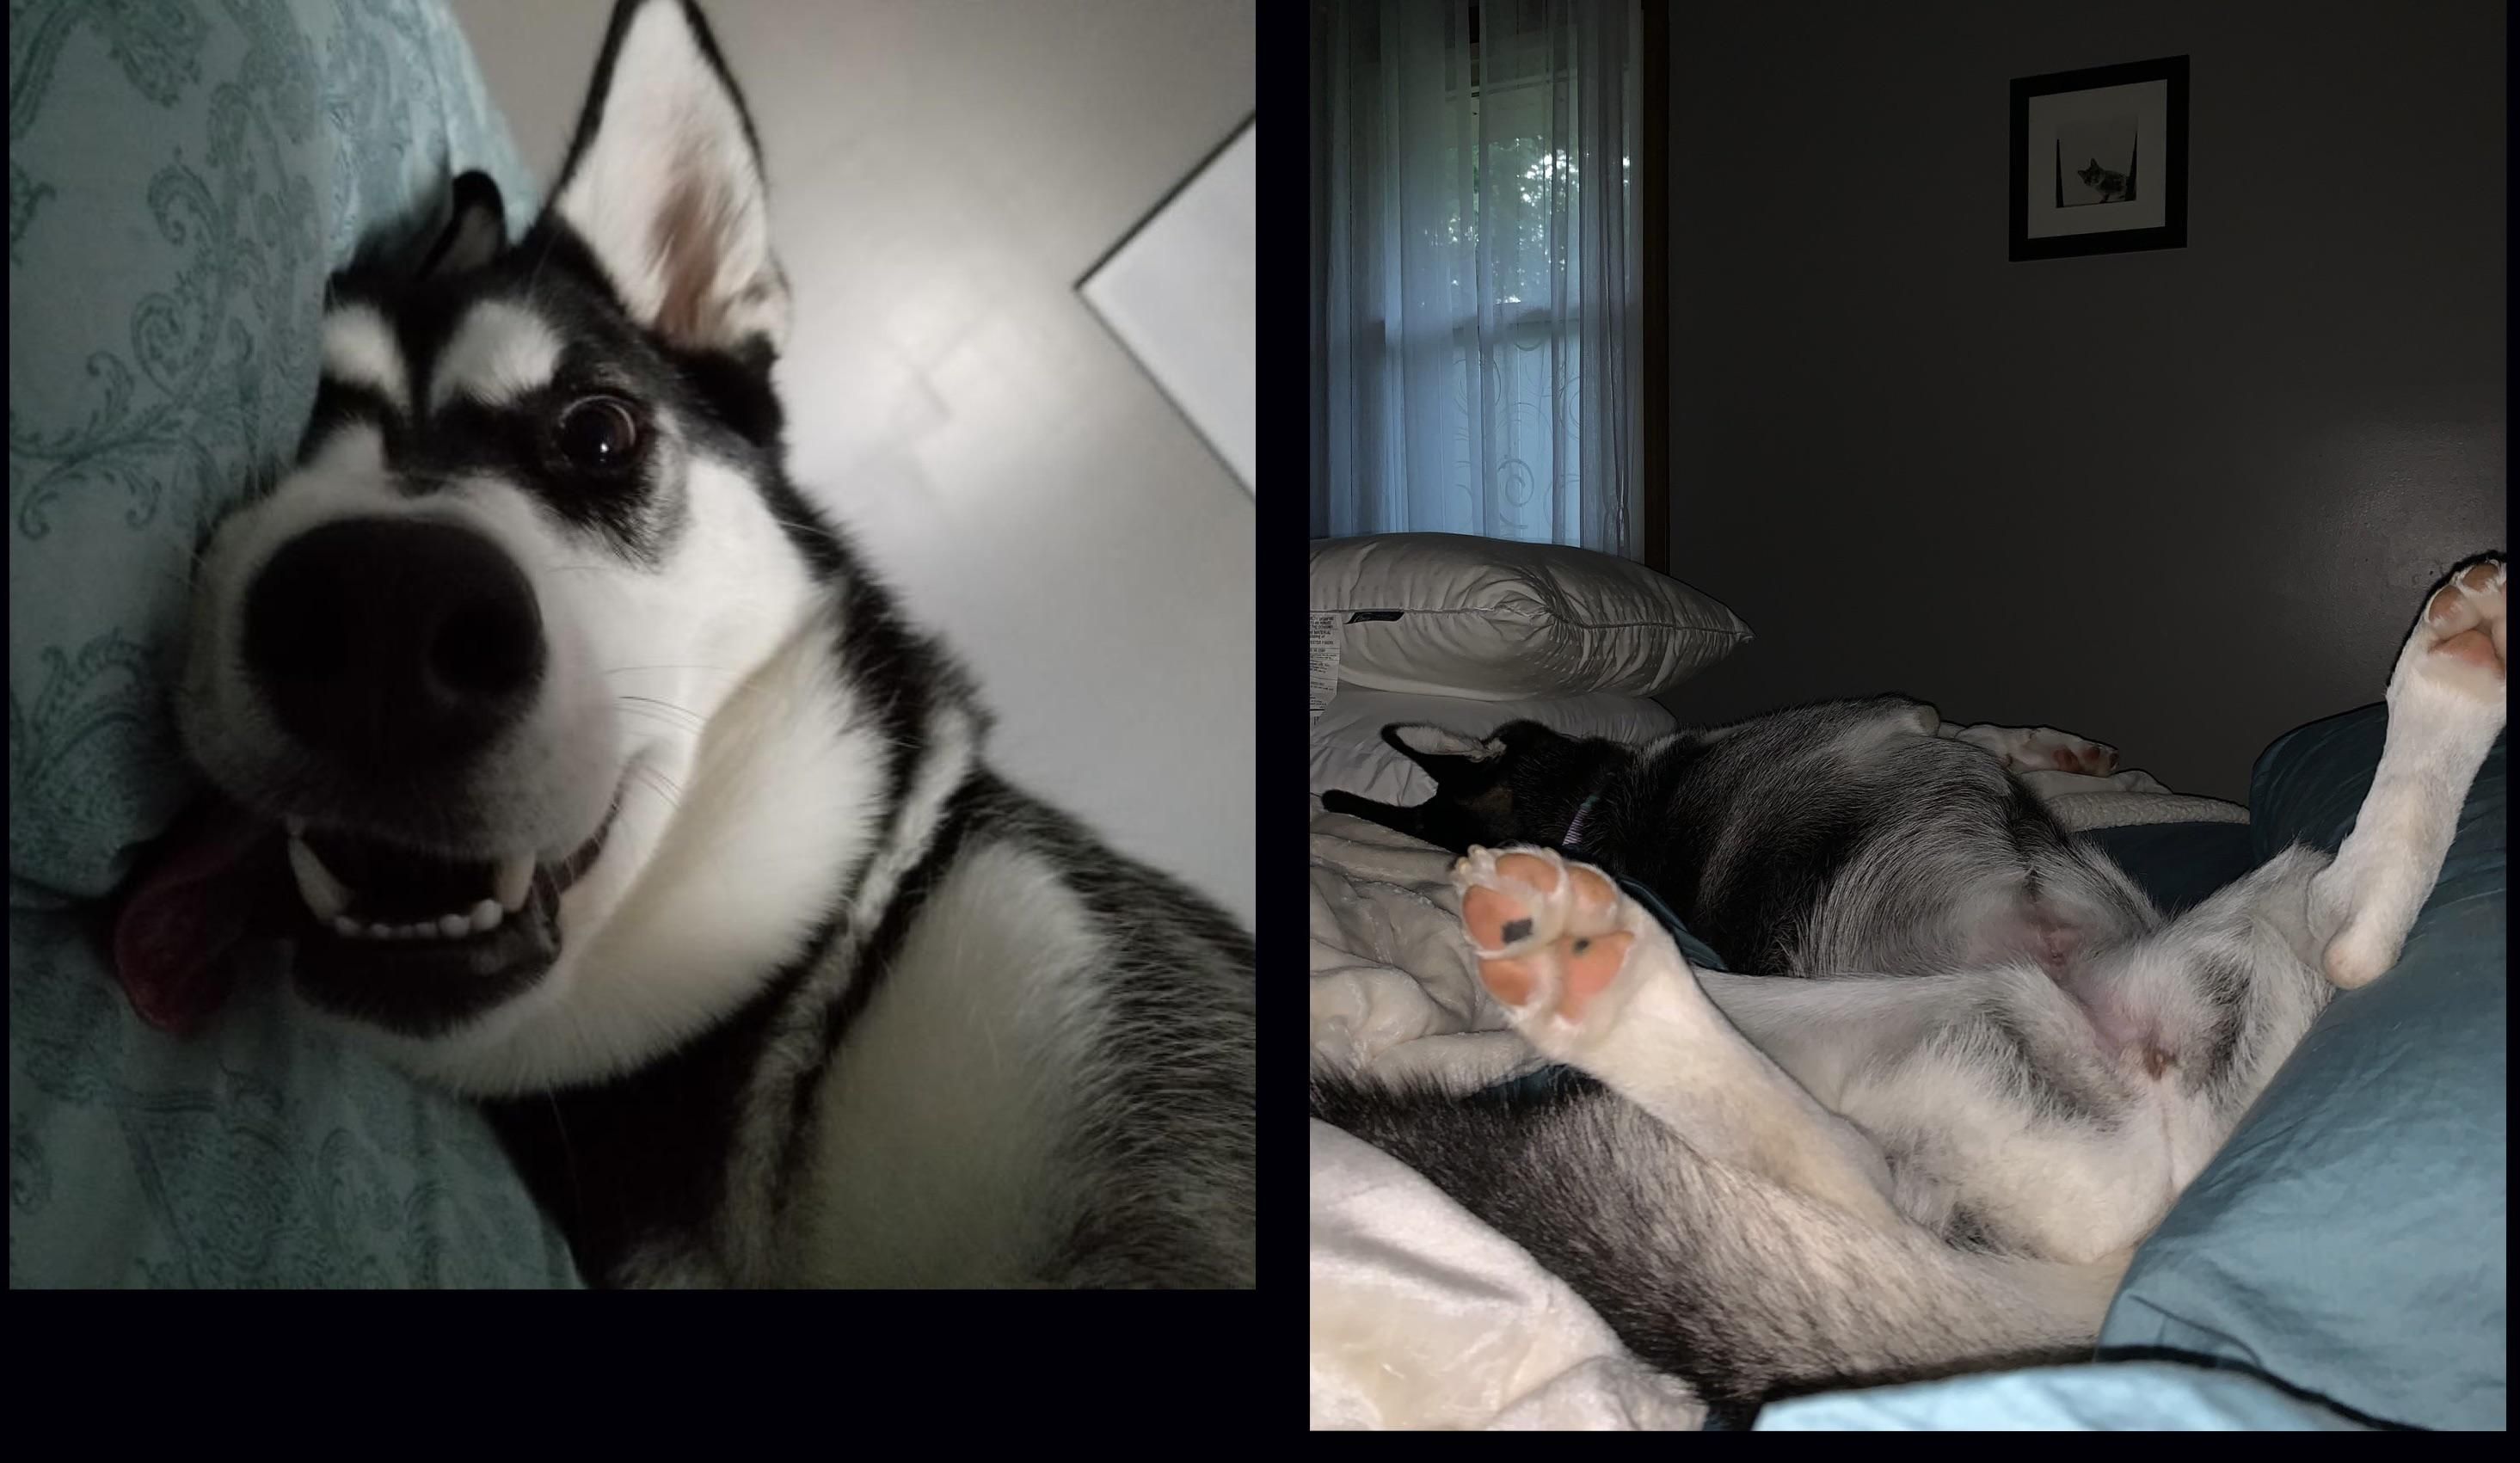 What my husband wakes up to vs. what I wake up to...